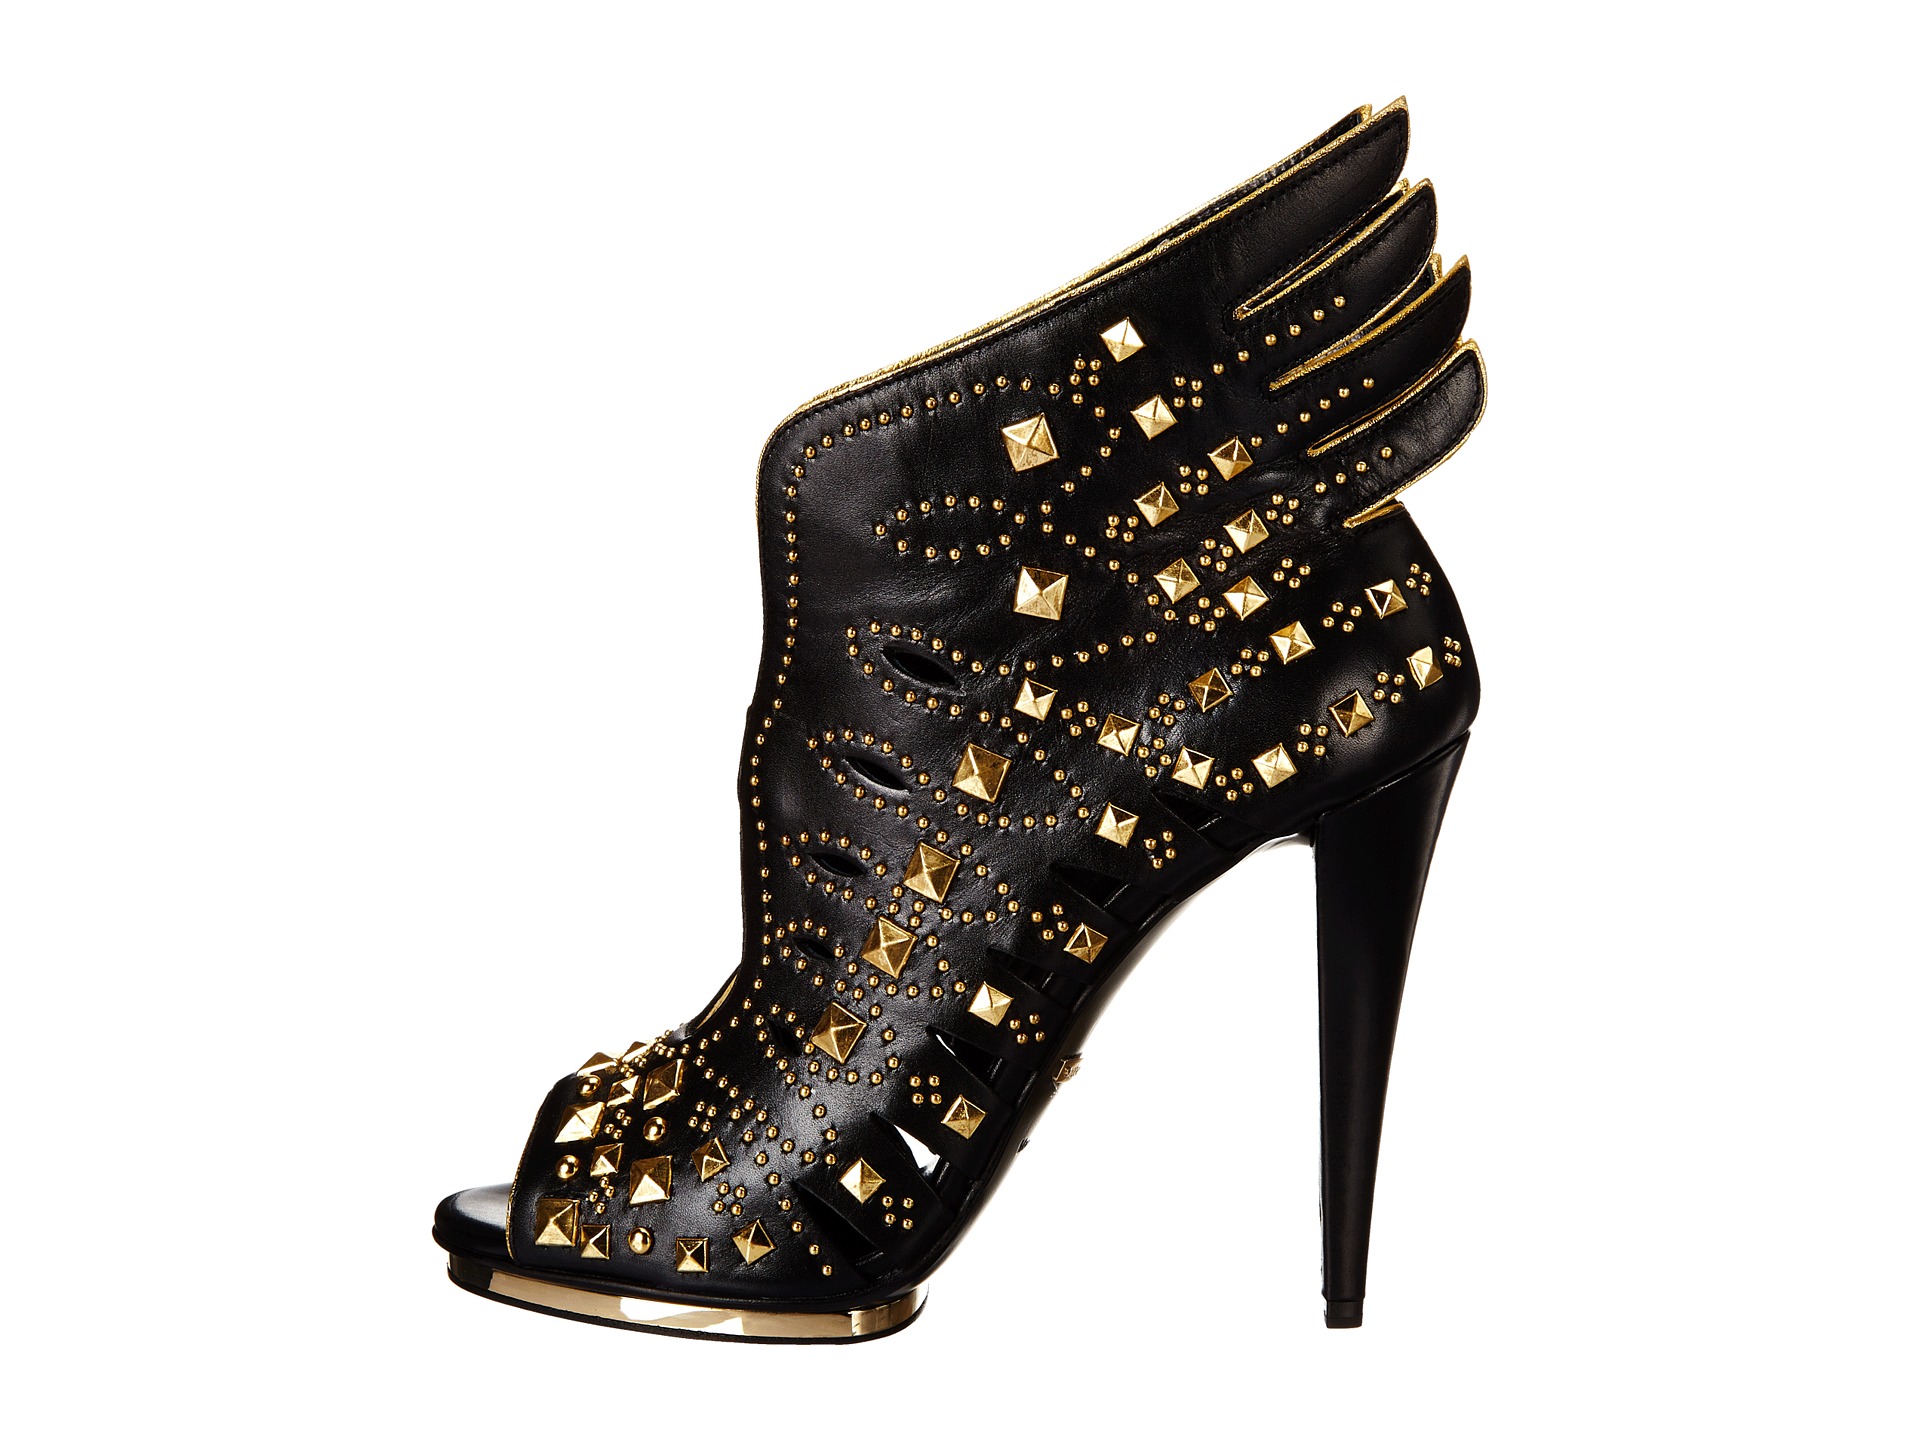 Roberto Cavalli Winged Althea Heel, Shoes, Women | Shipped Free at Zappos